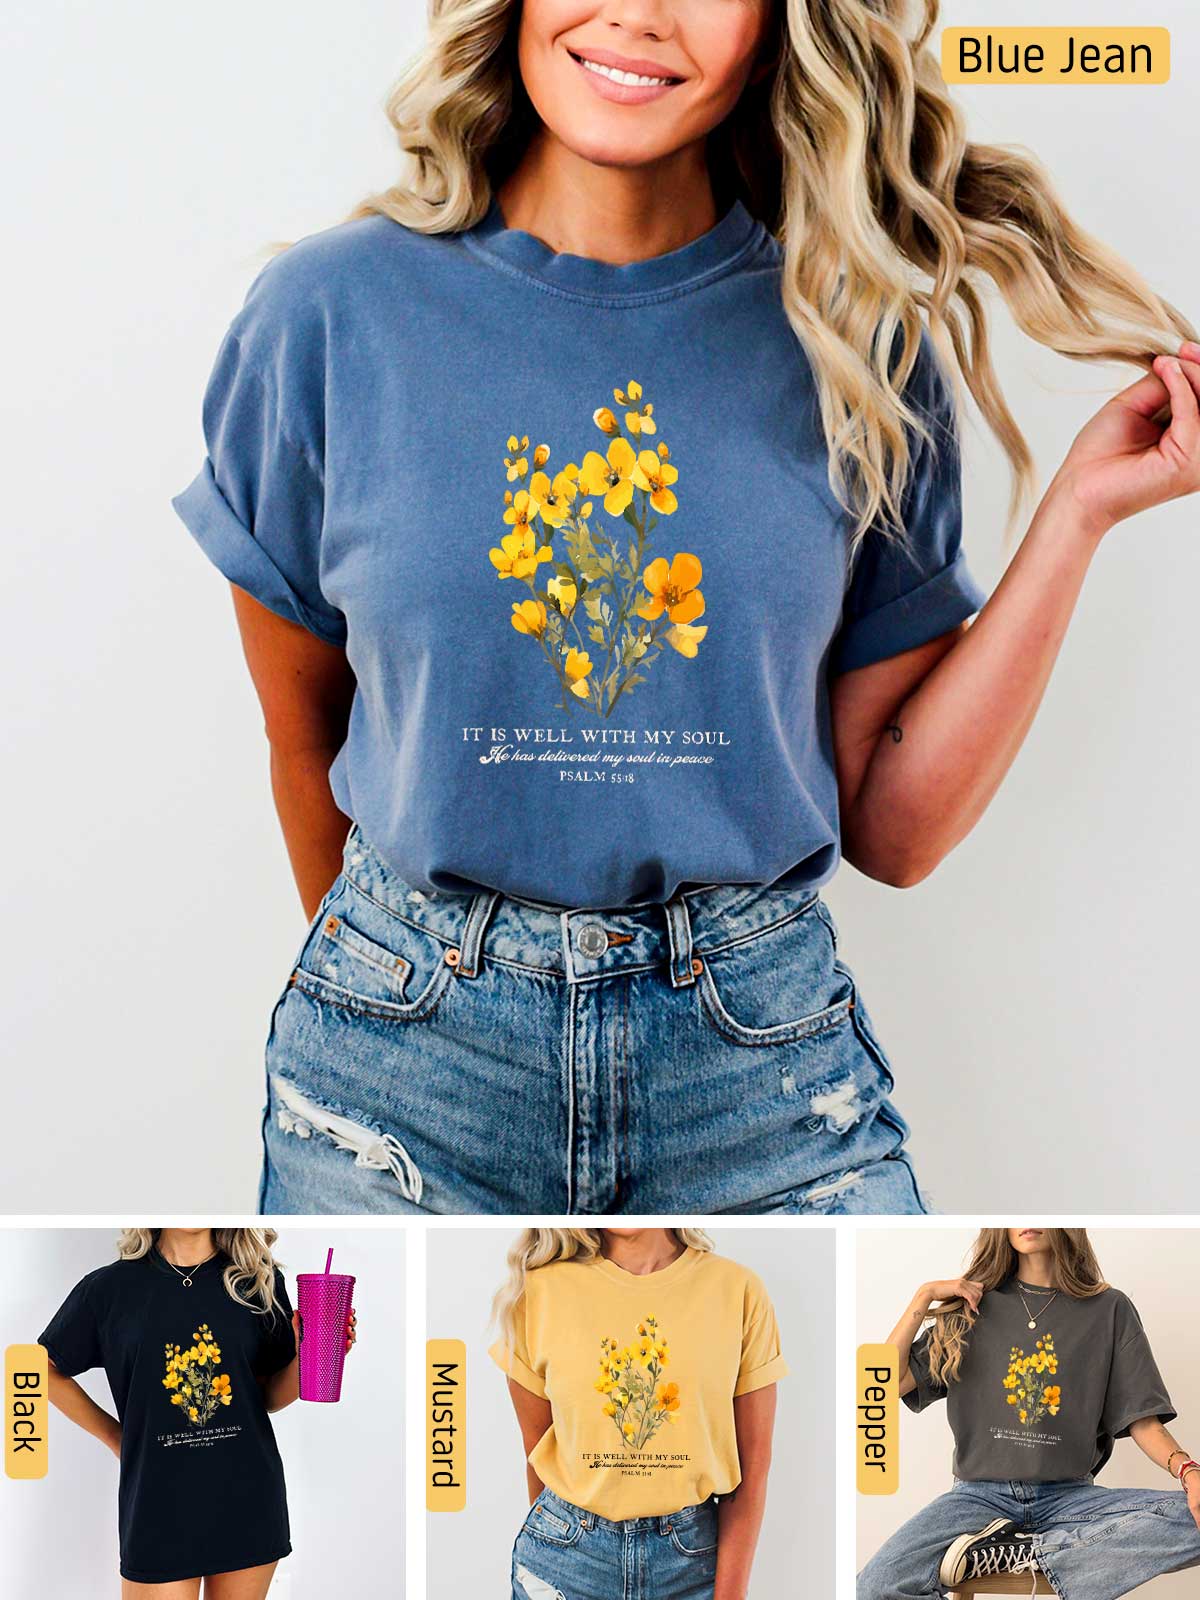 a woman wearing a blue jean shirt with yellow flowers on it